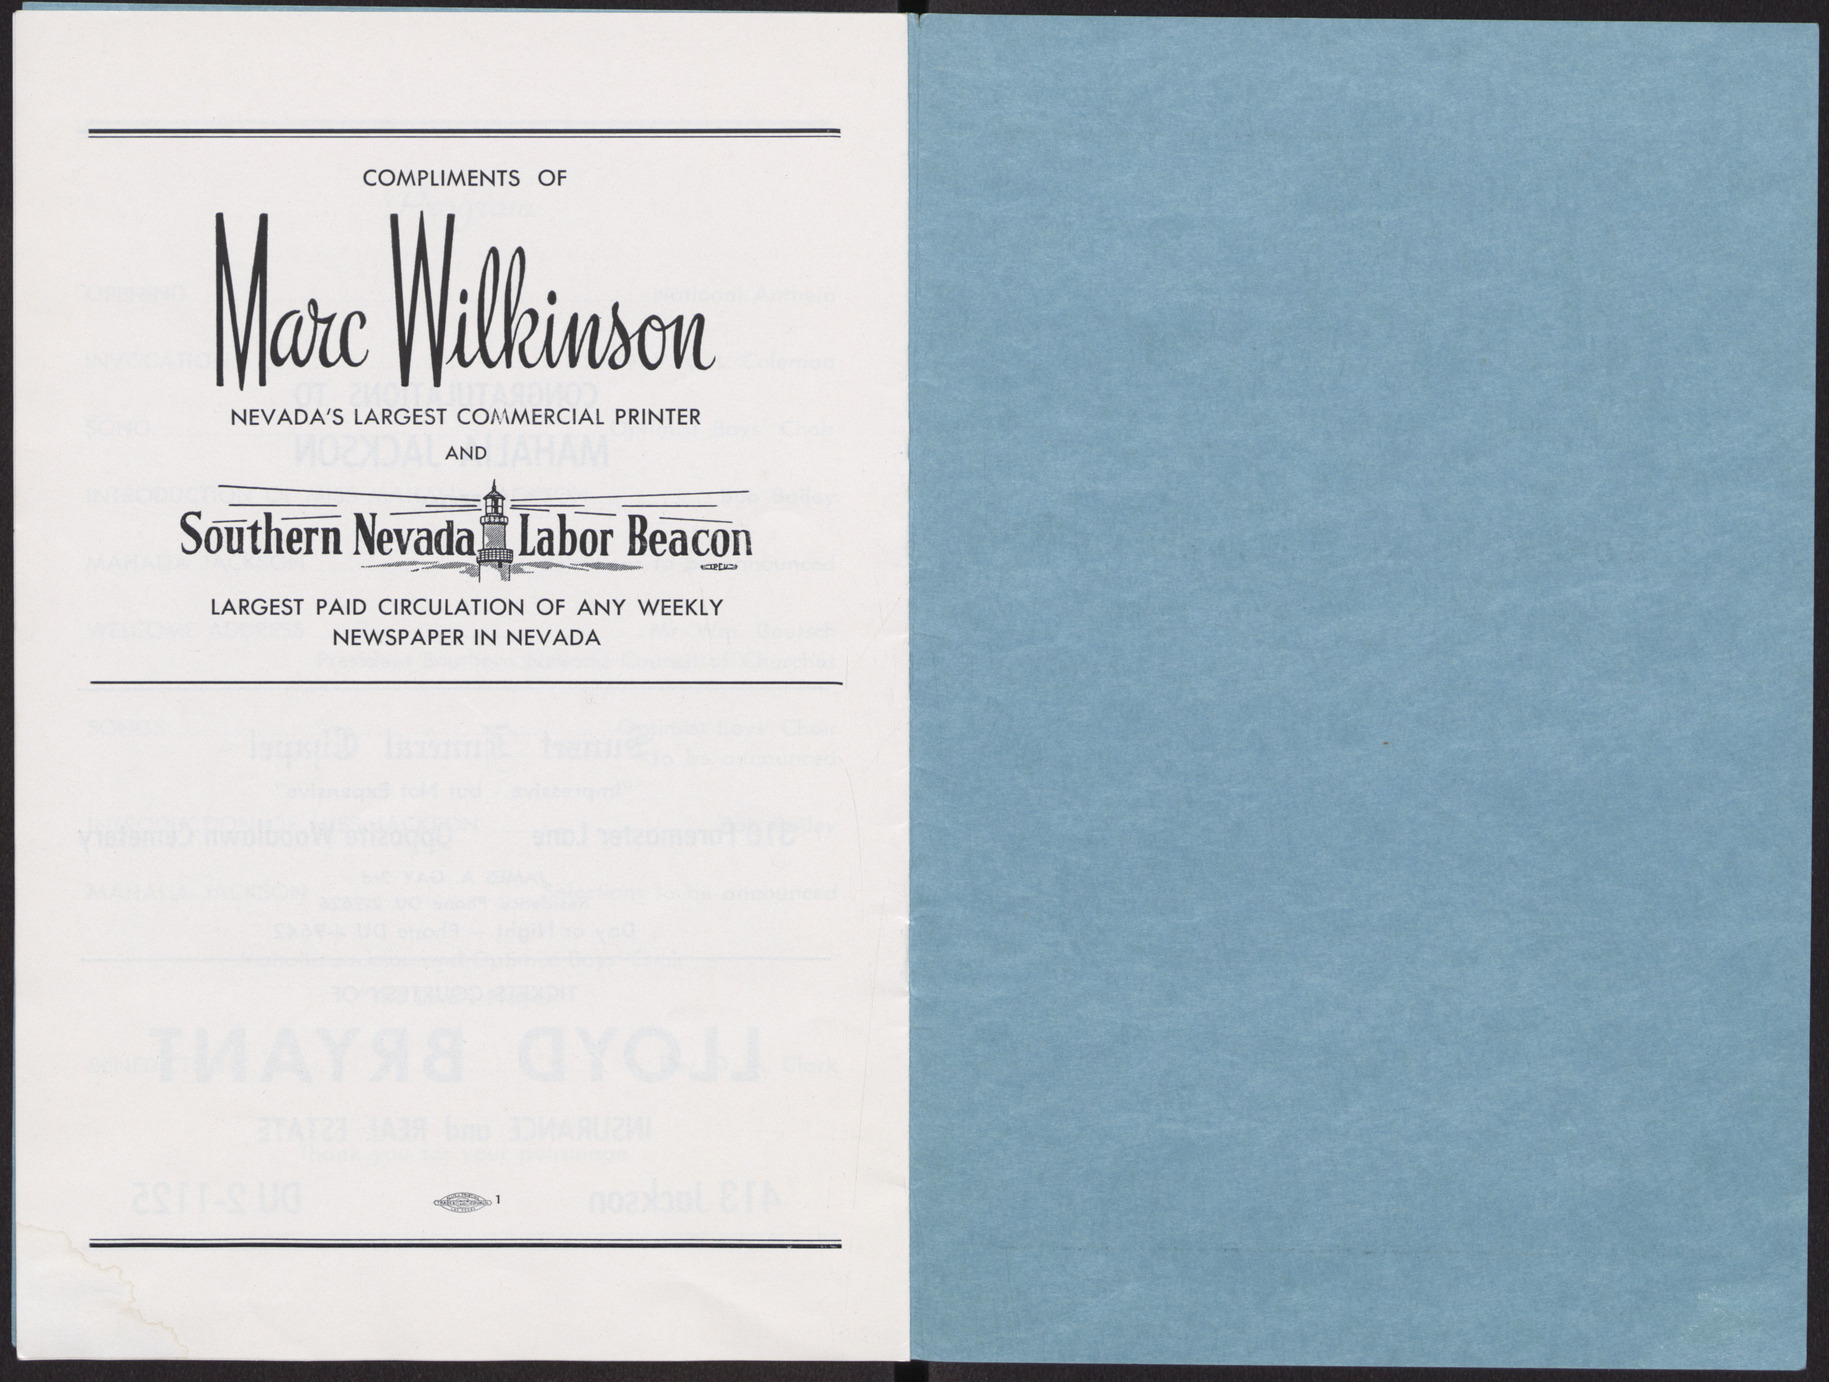 Program for event at Las Vegas Conventional Hall, August 9, 1959, page 9-10